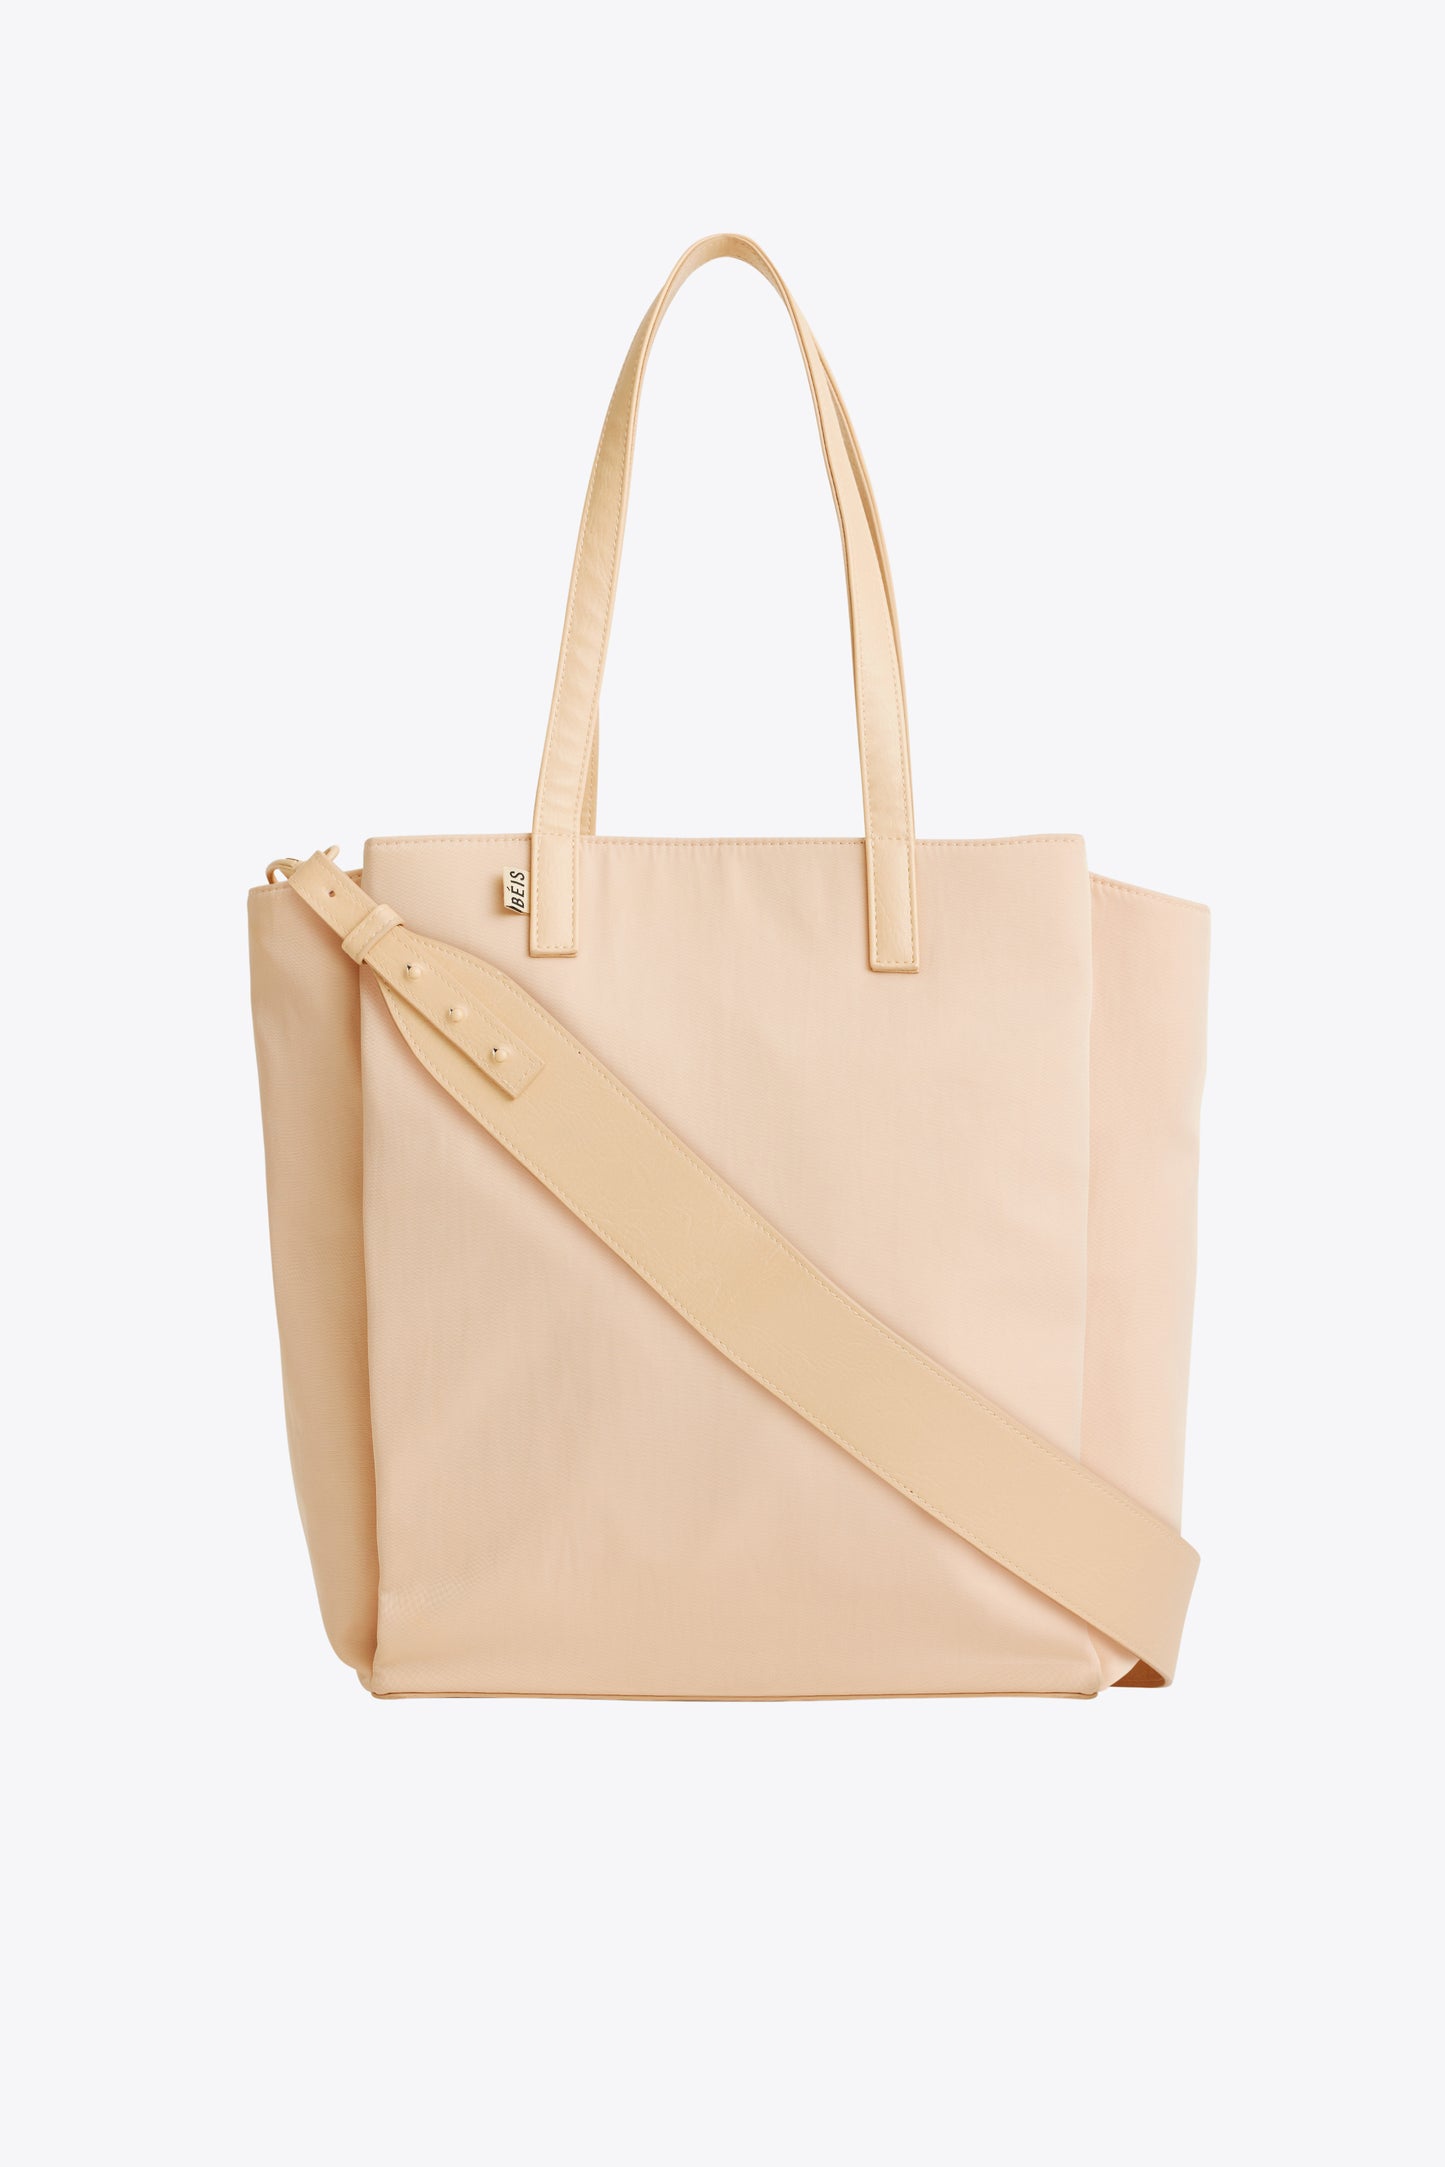 The Commuter Tote in Beige